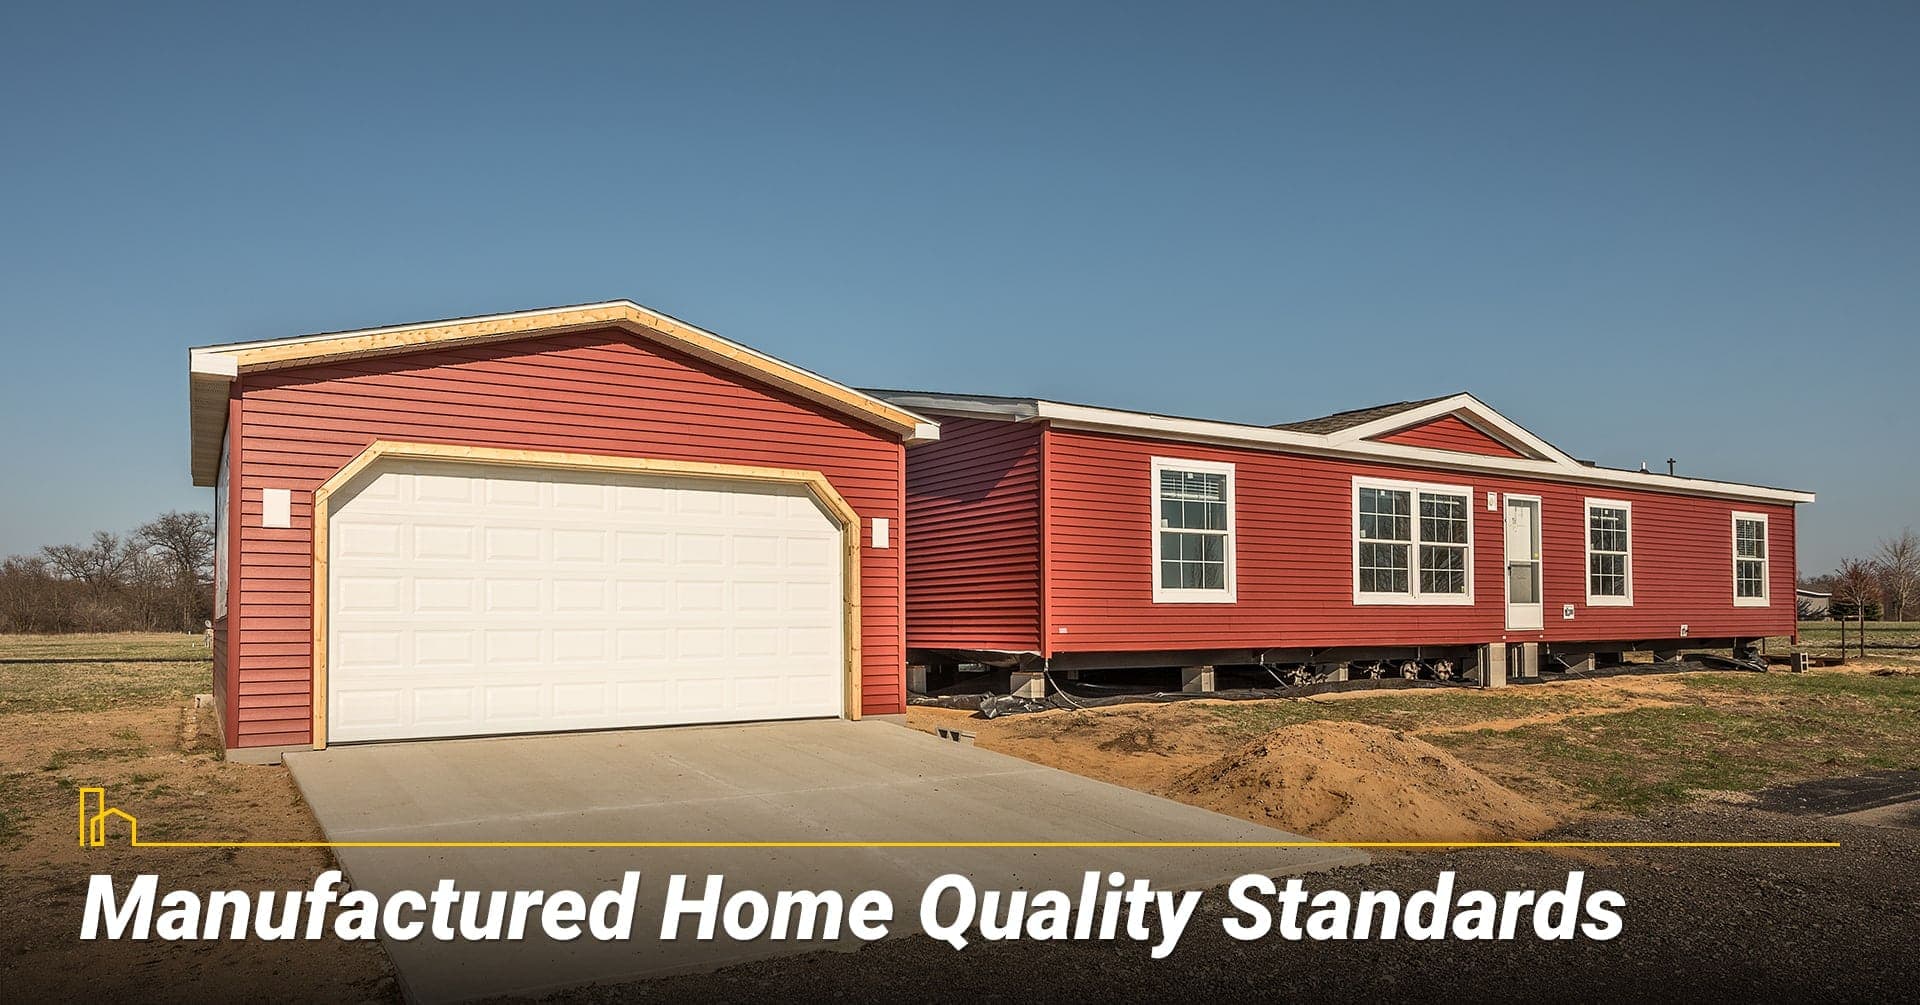 Manufactured Home Quality Standards, quality of a manufactured home